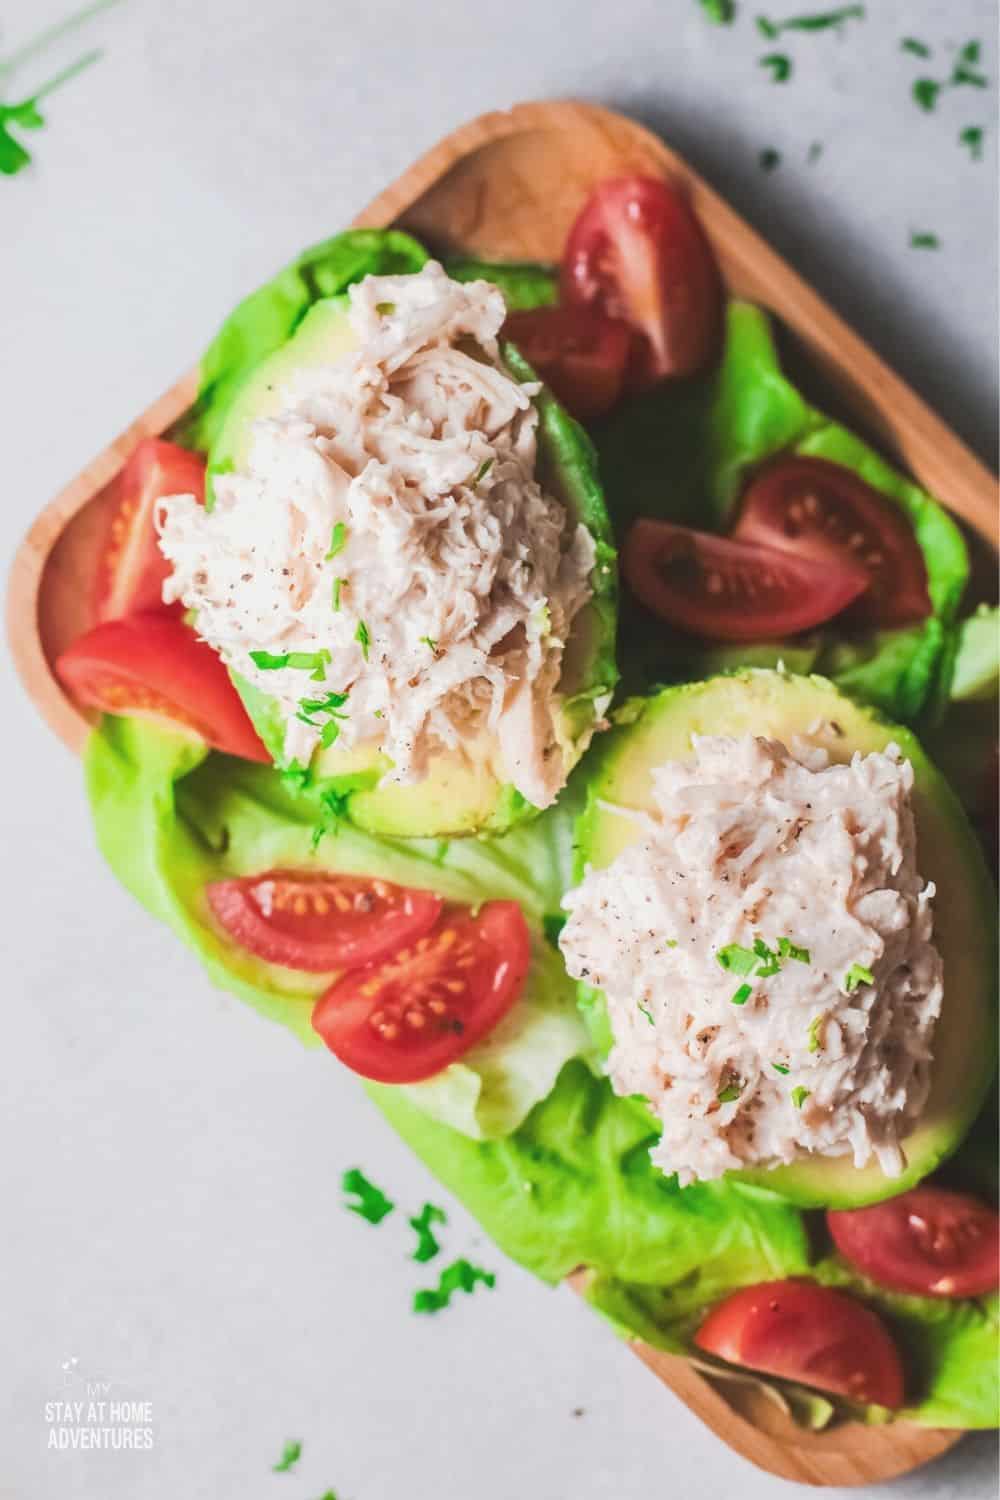 Stuffed avocados are delicious. Learn how to create simple to make stuffed avocados made with chicken breast. #avocadorecipe #stuffedavocado via @mystayathome